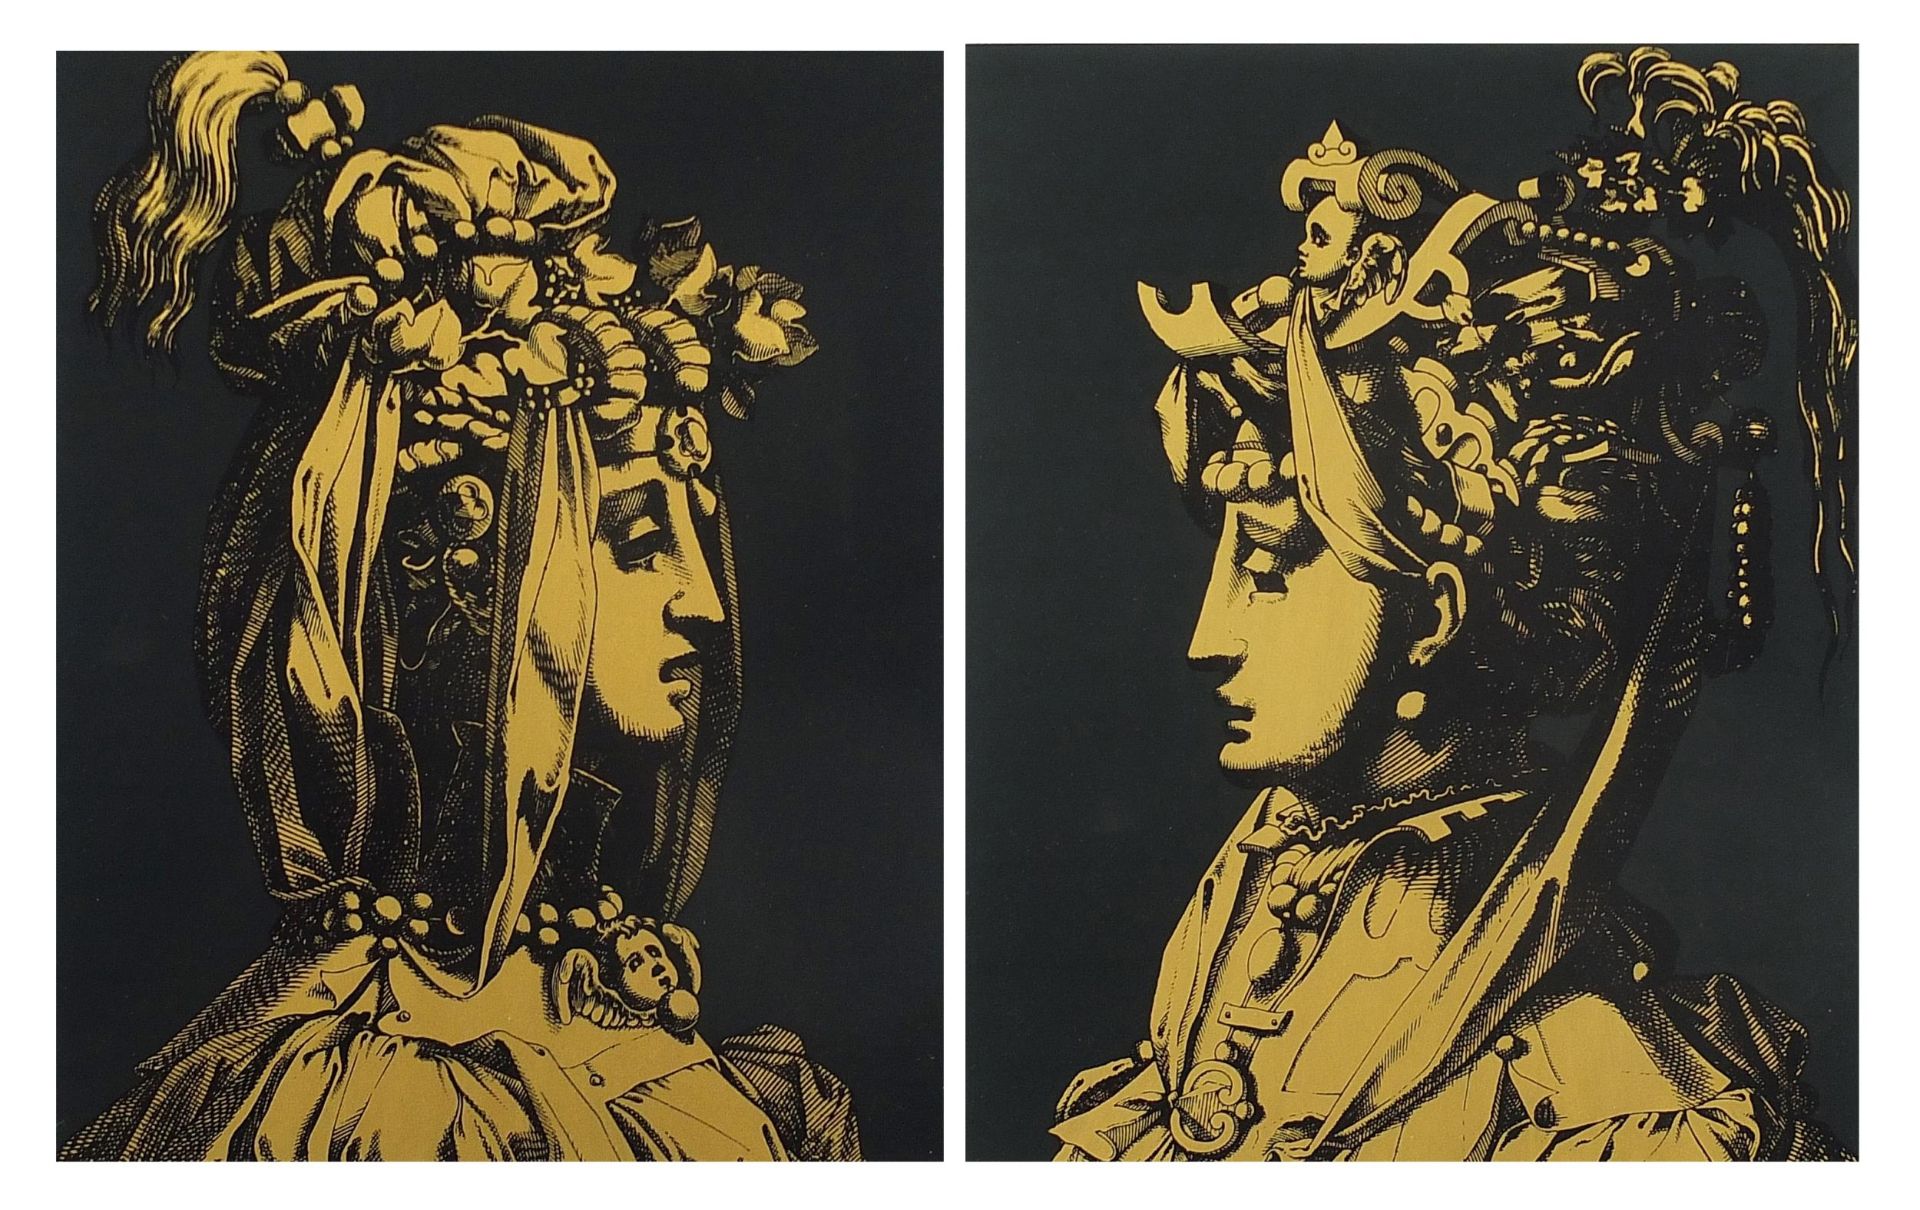 Females wearing headdresses, pair of reverse glass painted panels, each mounted, framed and